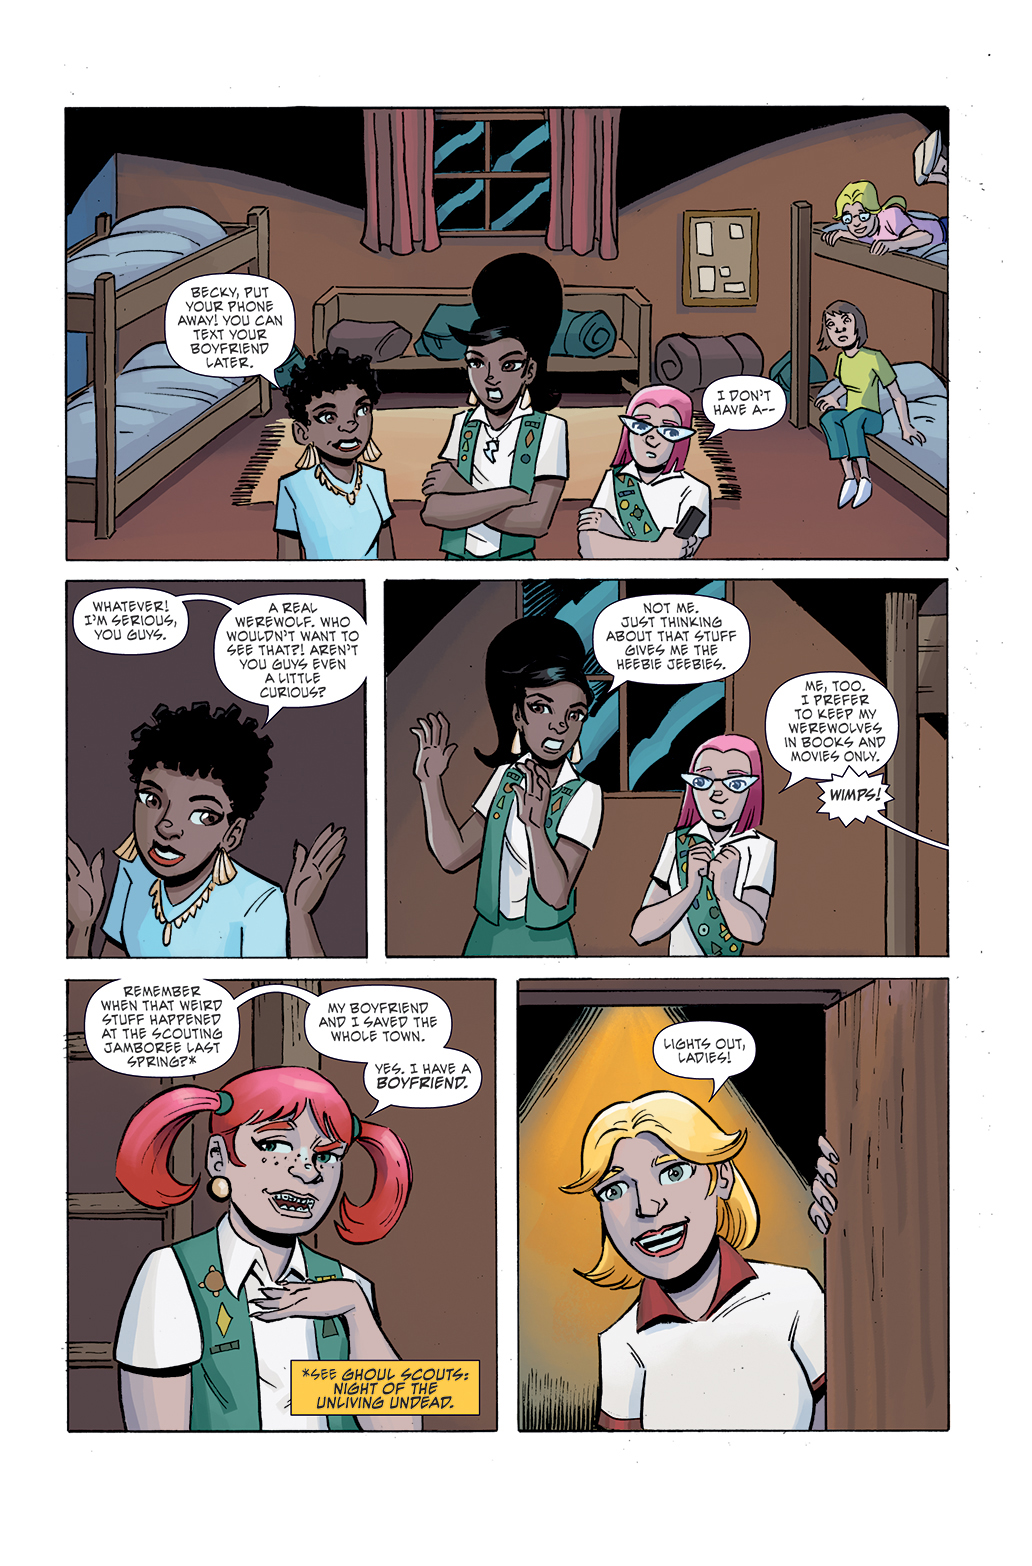 Ghoul Scouts Volume 2 #1 Page 17.jpg